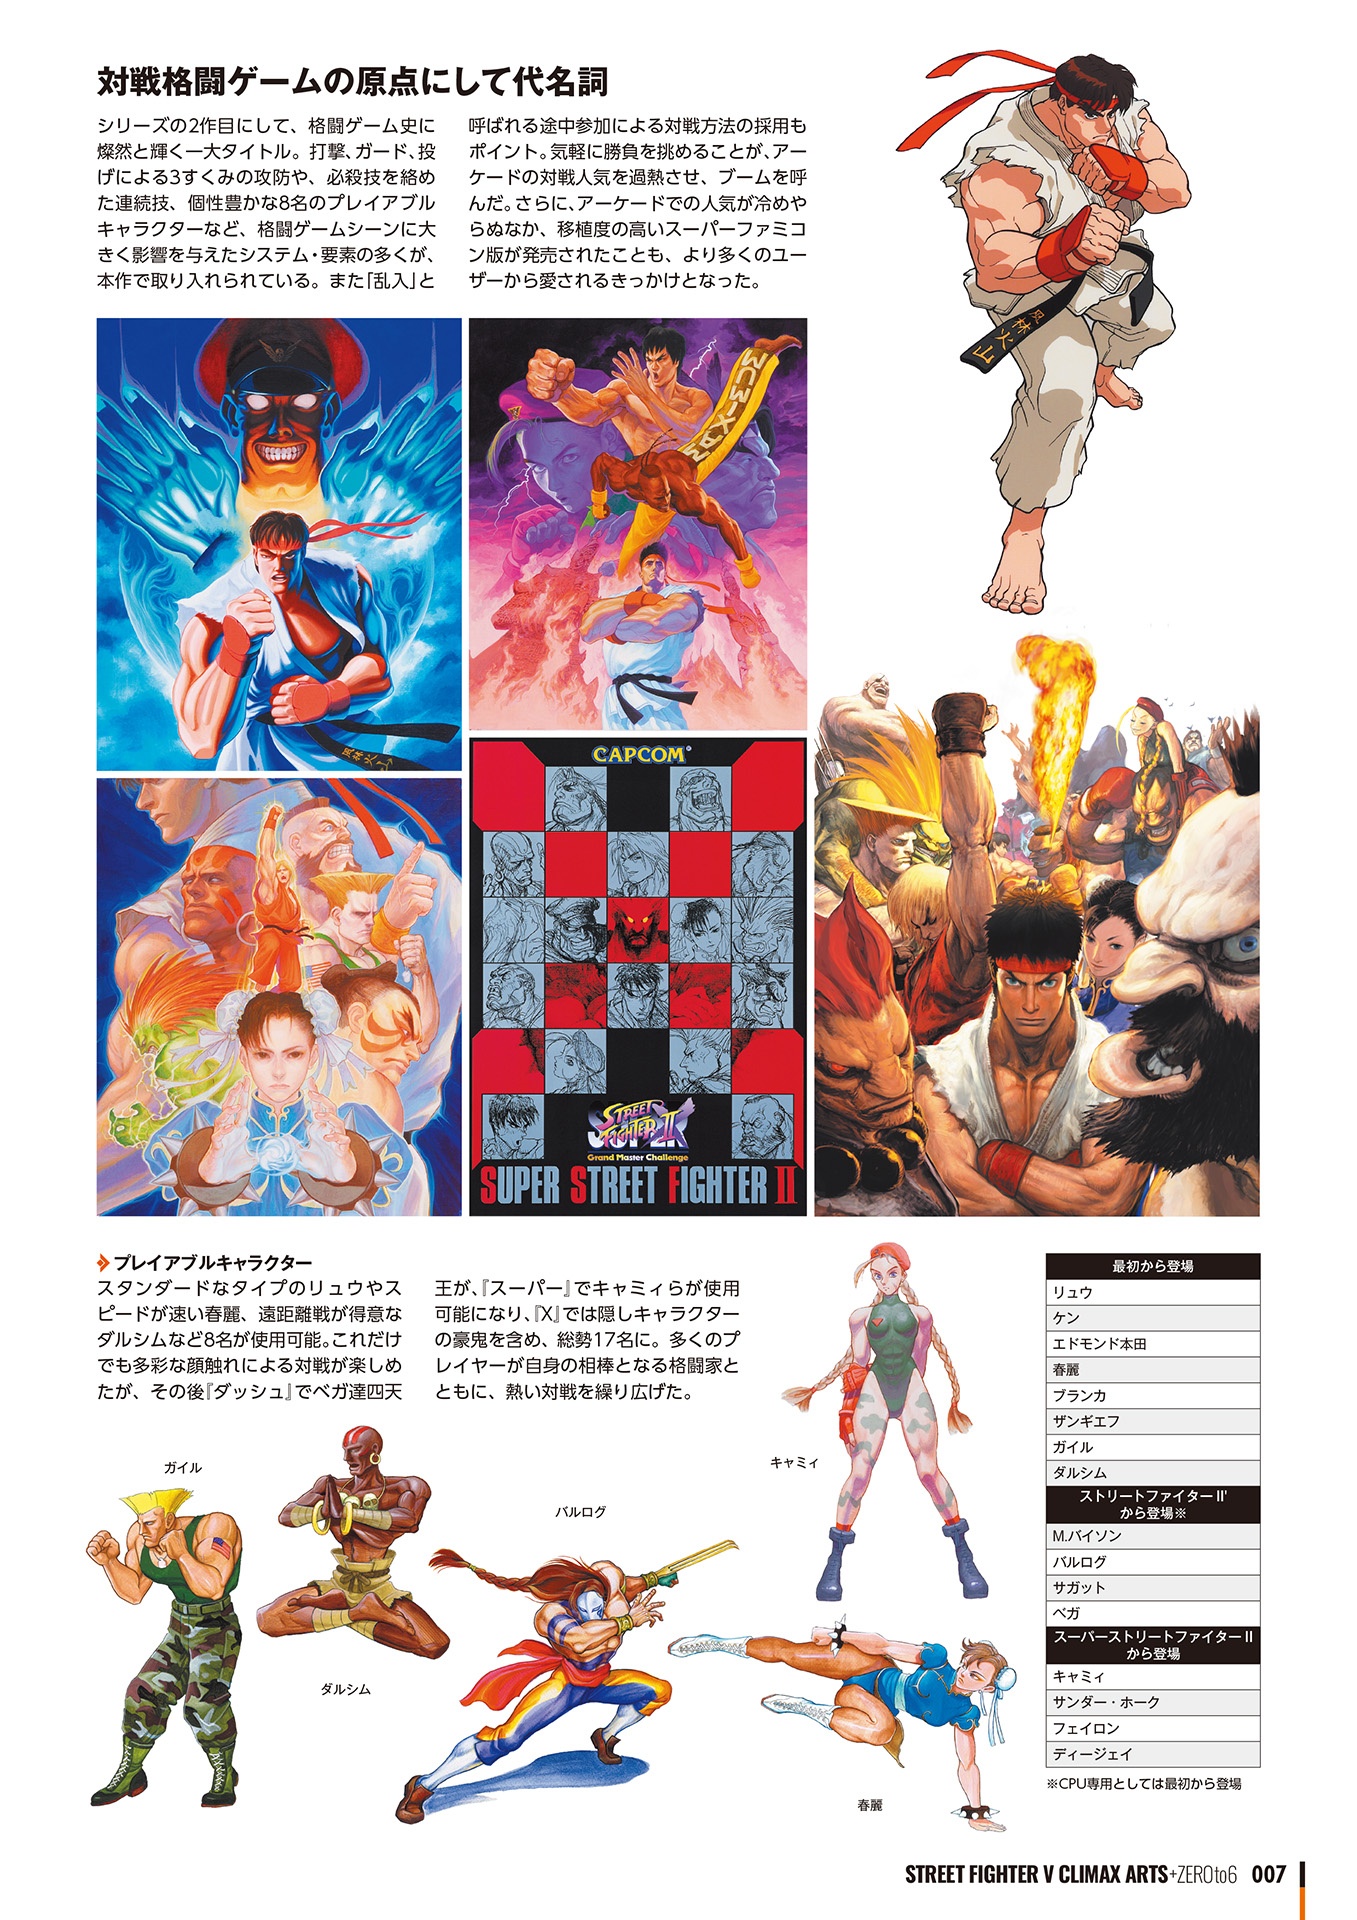 Street Fighter V 5 Climax Arts + Zero to 6 Art Book